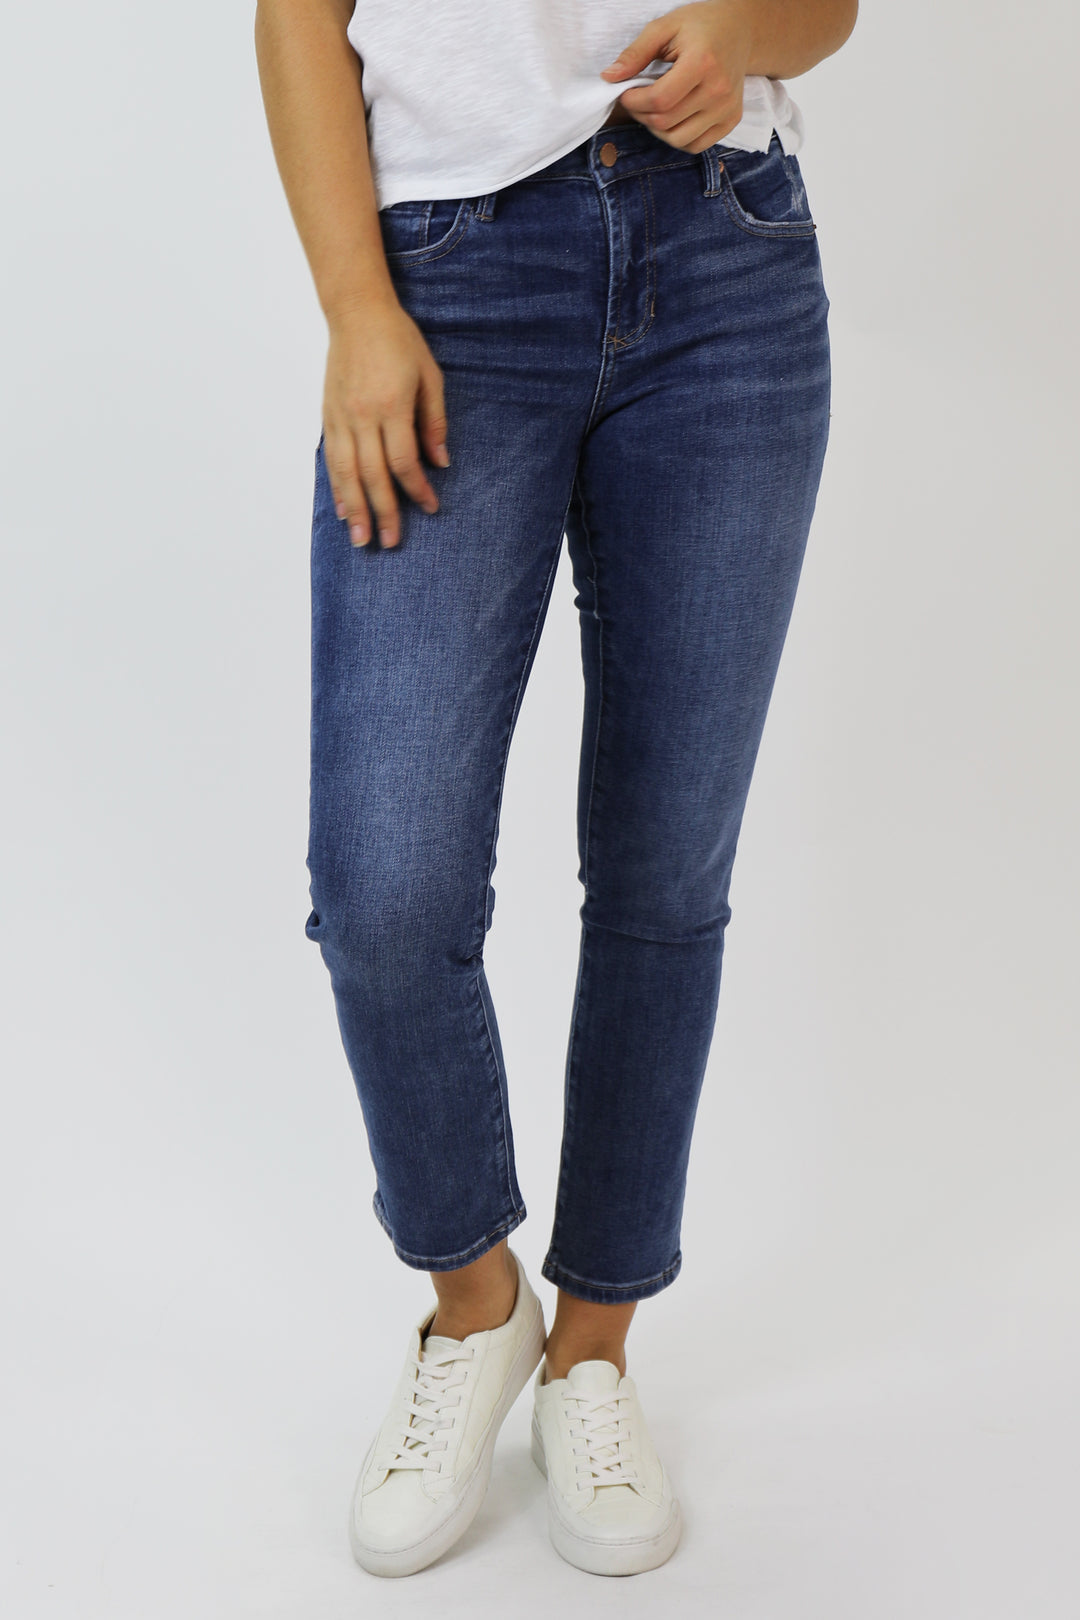 image of a female model wearing a BLAIRE HIGH RISE ANKLE SLIM STRAIGHT JEANS SOUTH BAY DEAR JOHN DENIM 